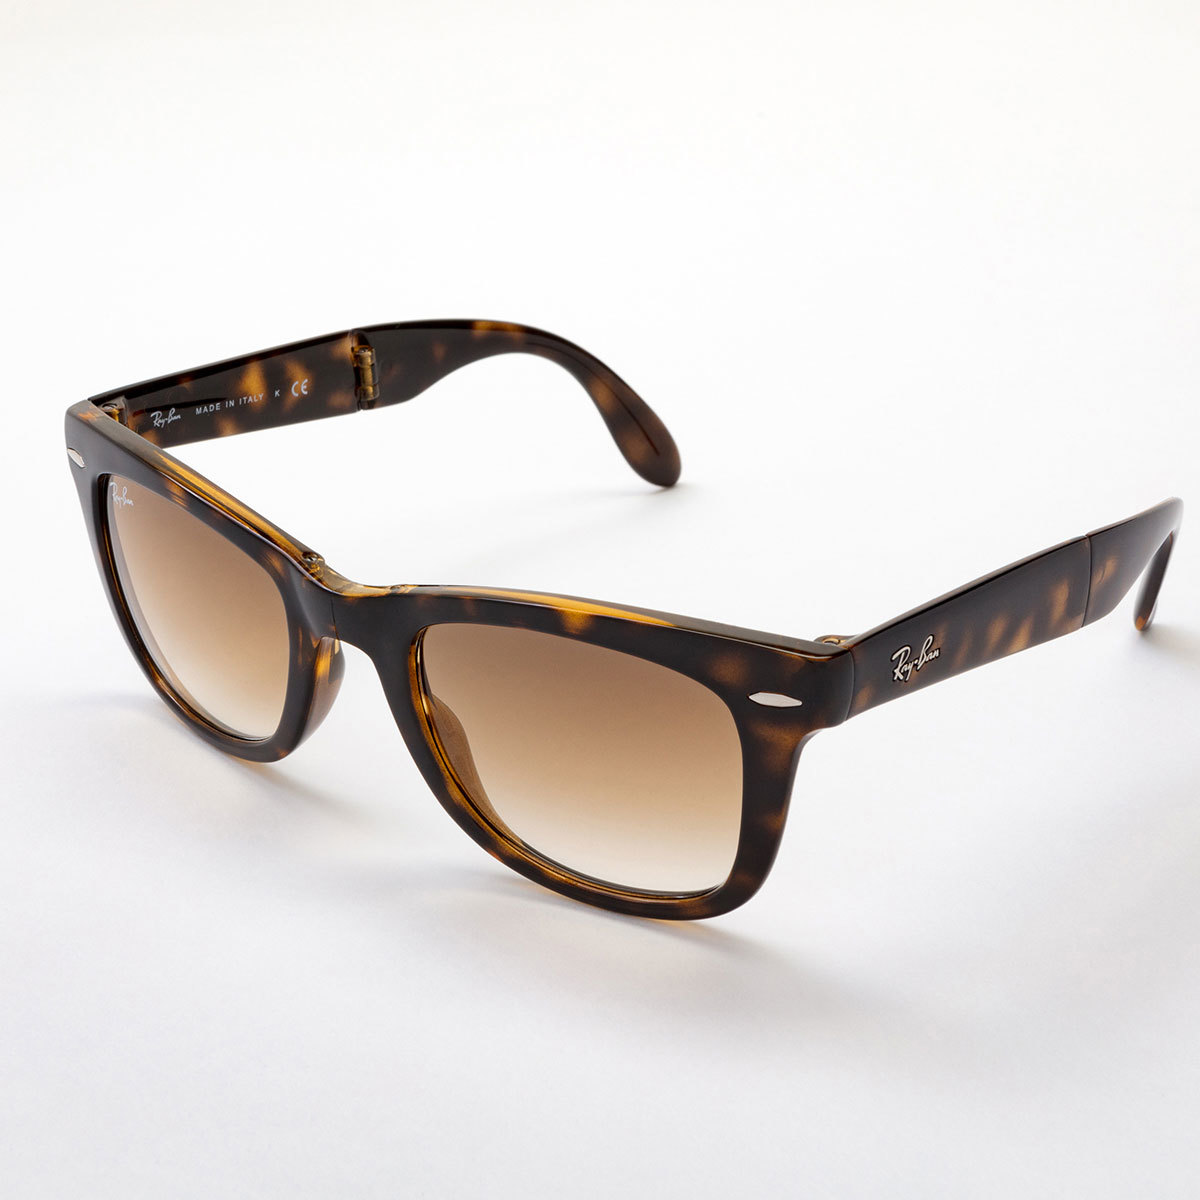 Ray-Ban Tortoise Shell Sunglasses with Brown Lenses, RB4105 710/51 ...